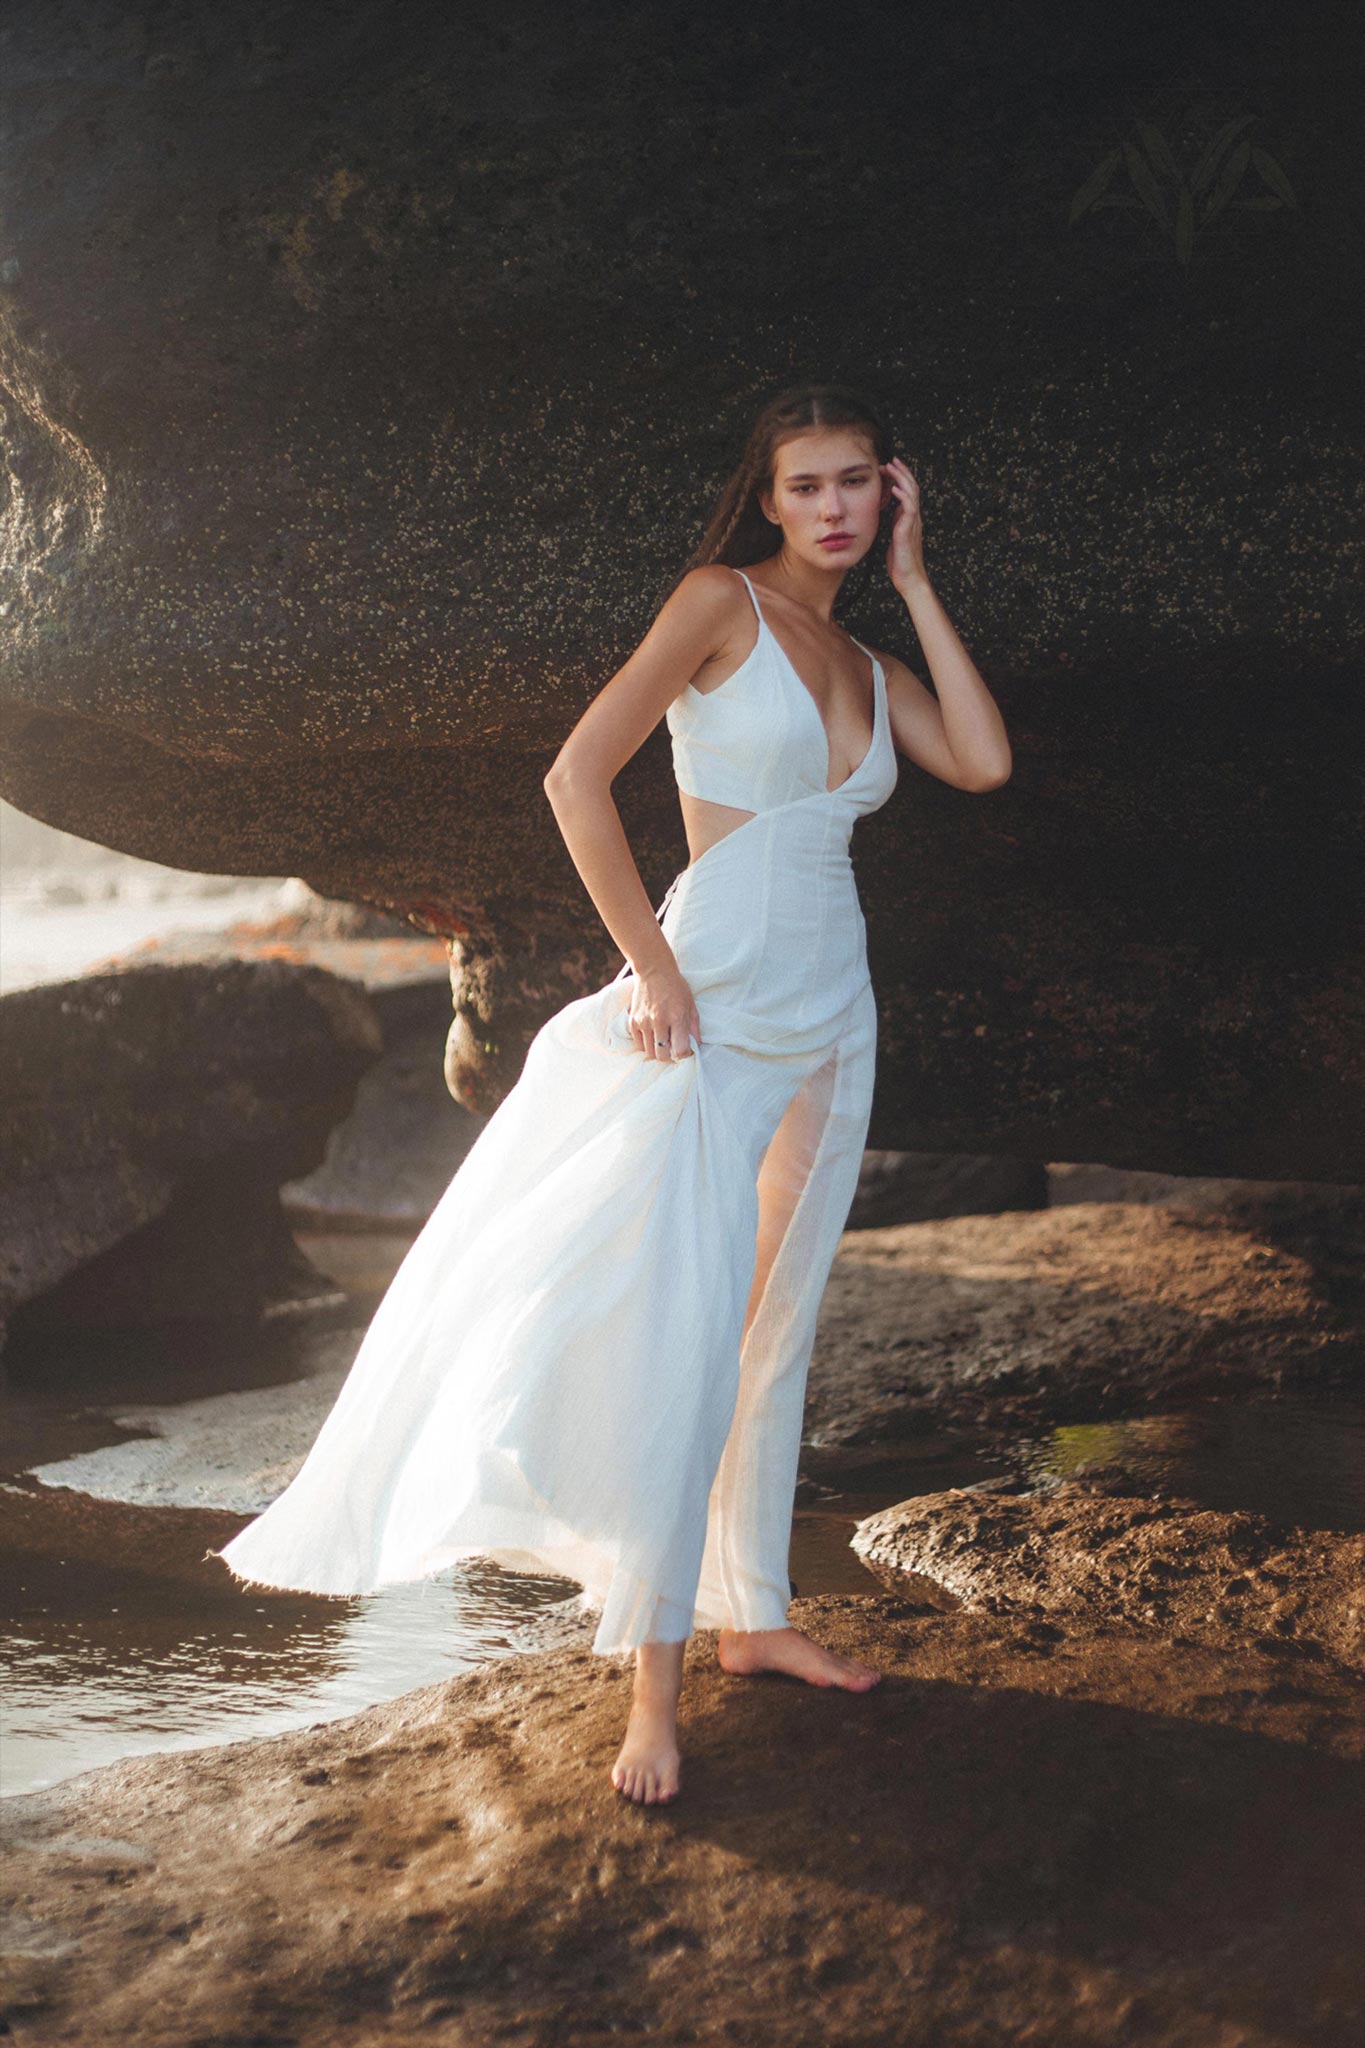 Get Ready in Style with Aya Sacred Wear's Off-White Light Cotton and Silk Formal Bridal Dress